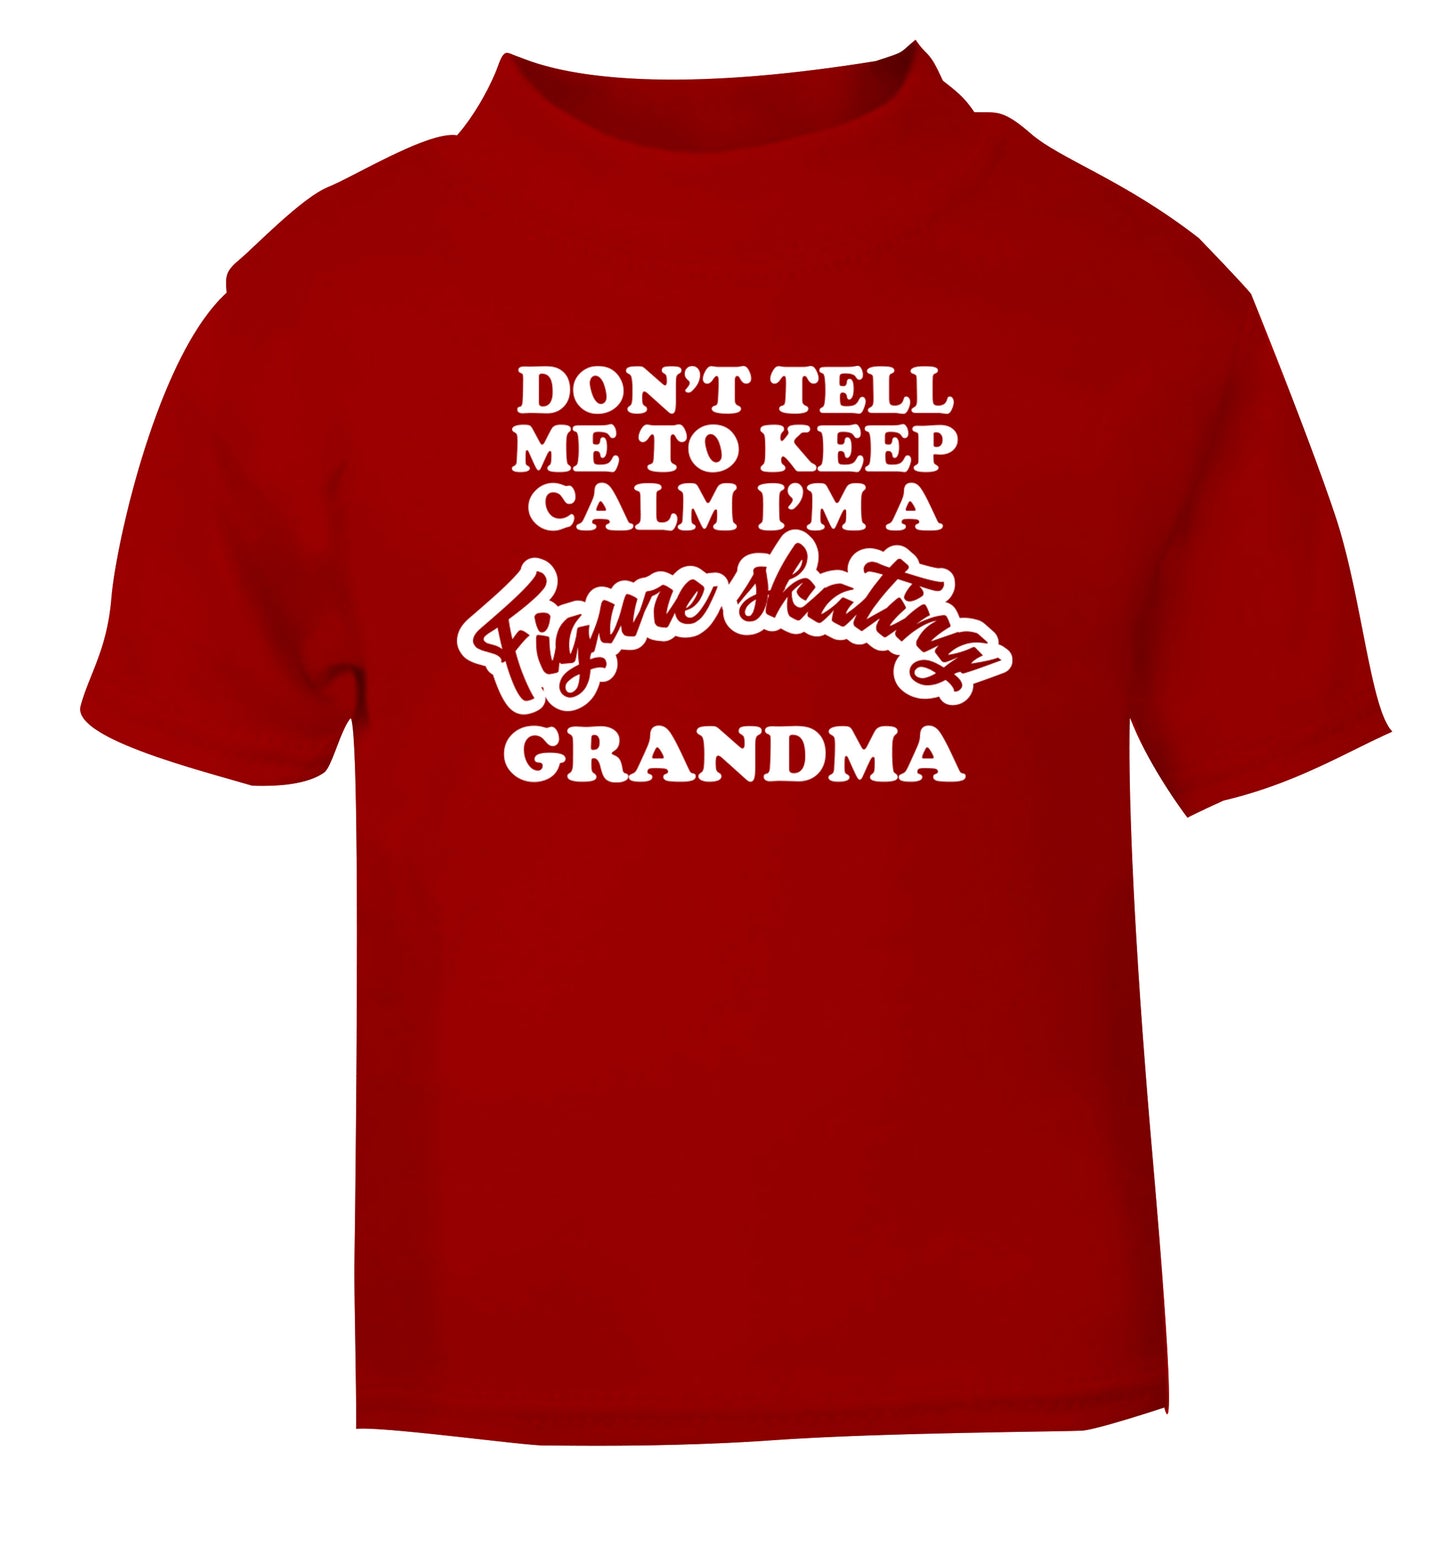 Don't tell me to keep calm I'm a figure skating grandma red Baby Toddler Tshirt 2 Years